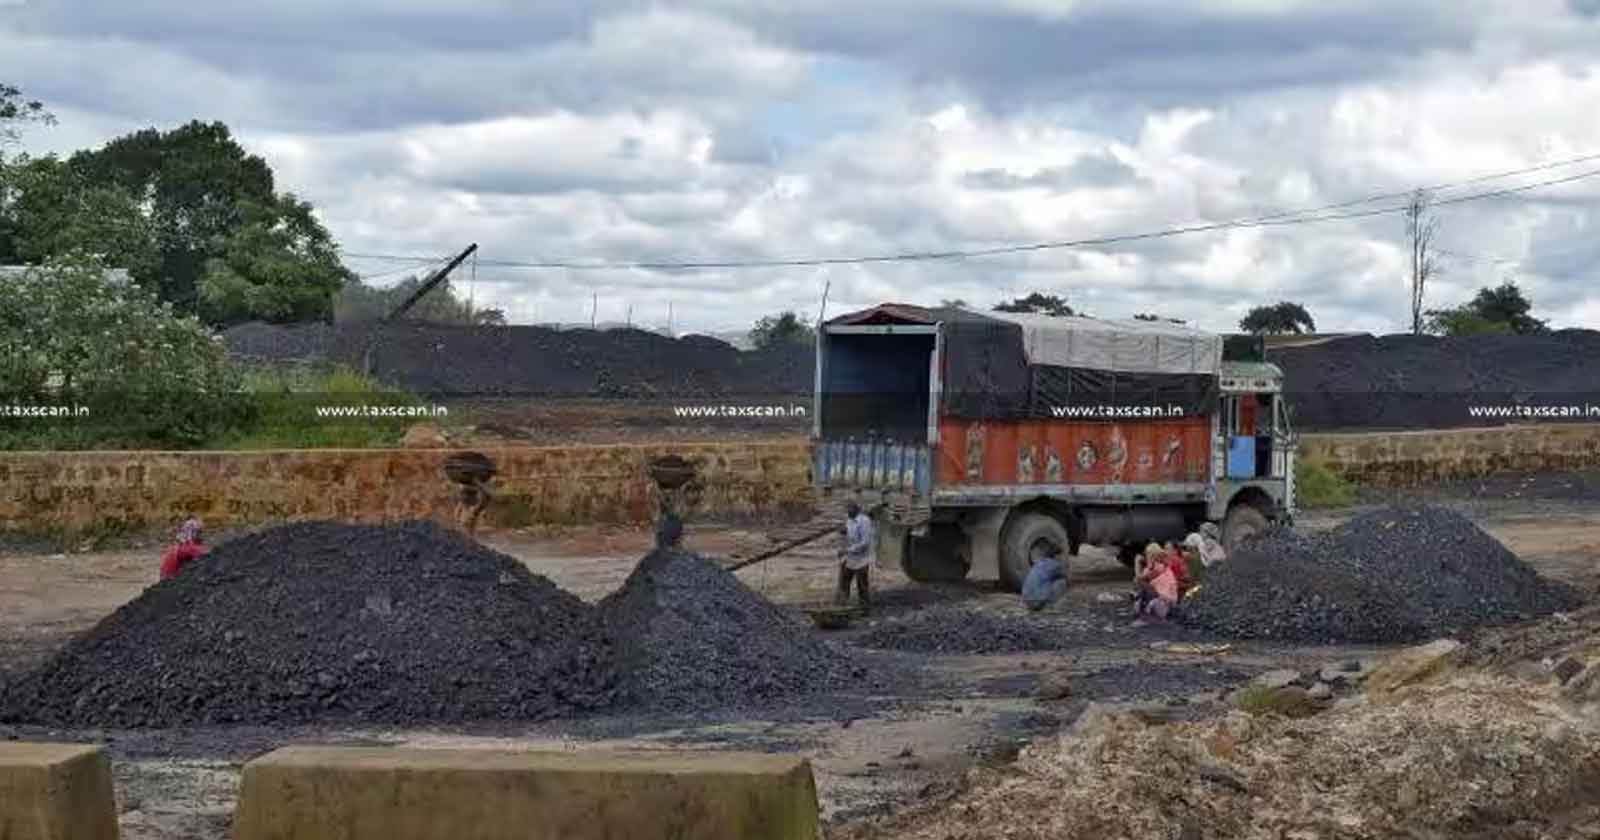 DGFT revises Time period - Applying registration under Coal Import Monitoring System (CIMS) - TAXSCAN